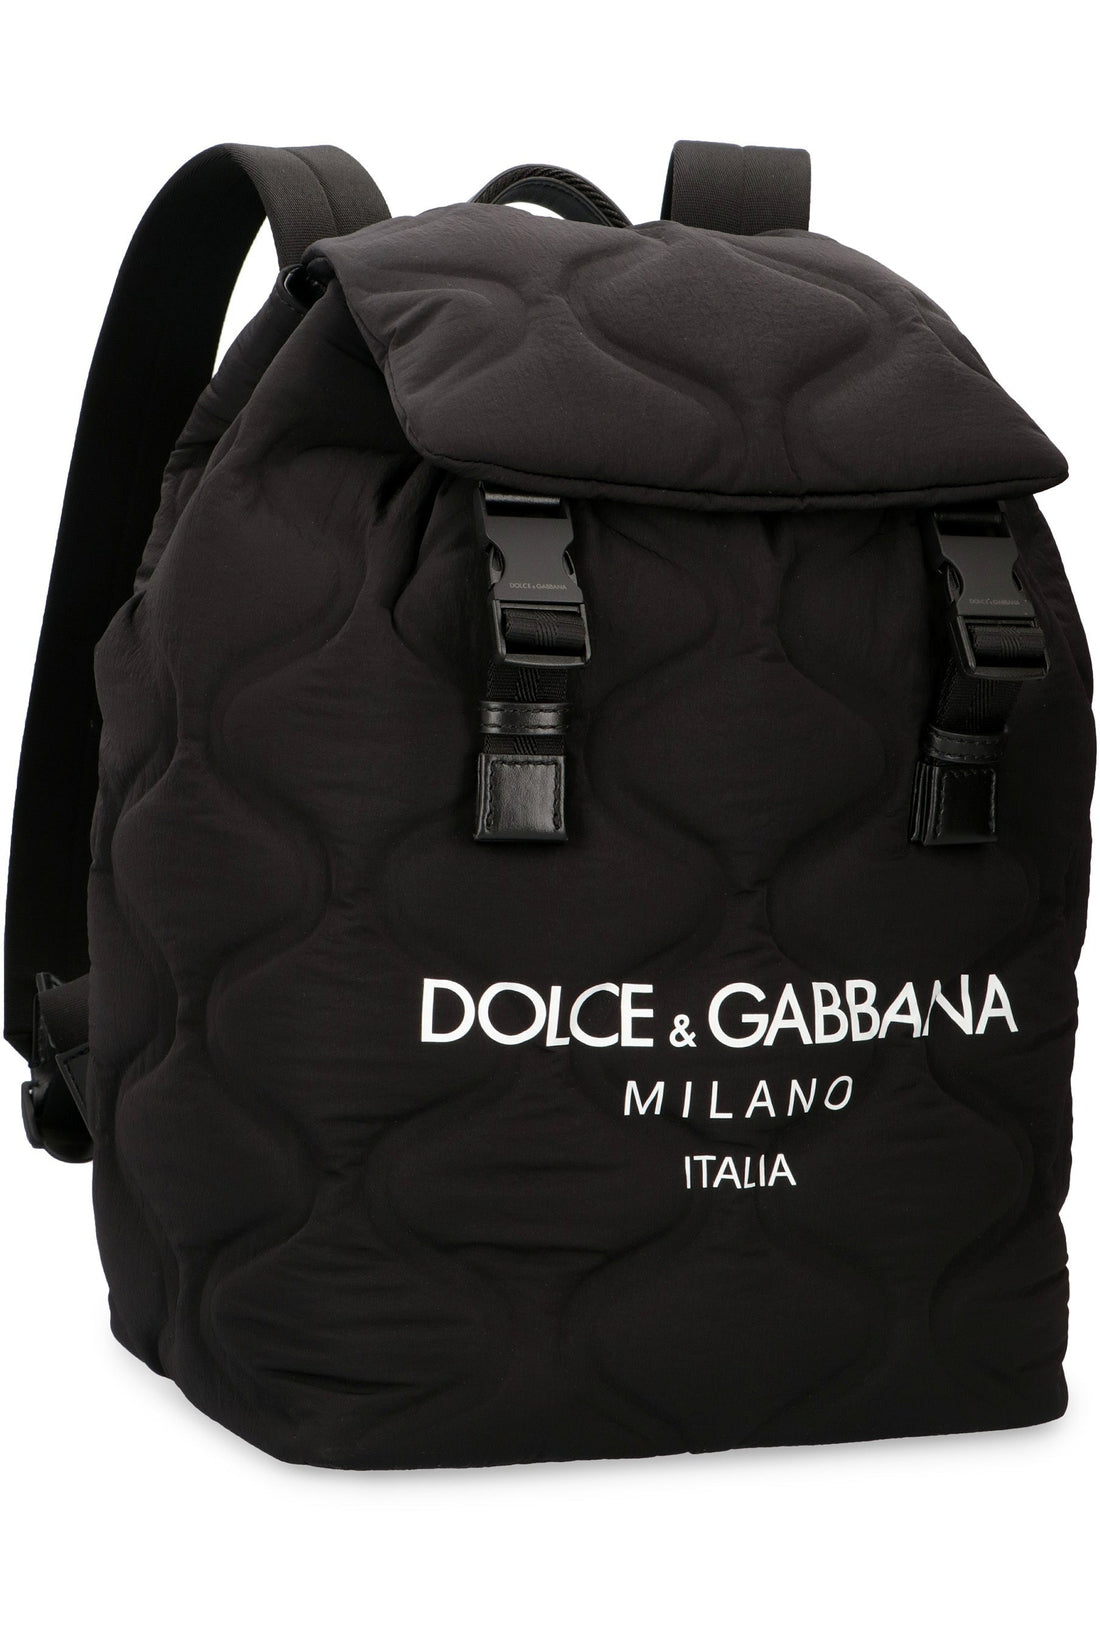 Dolce & Gabbana-OUTLET-SALE-Backpack with logo print-ARCHIVIST